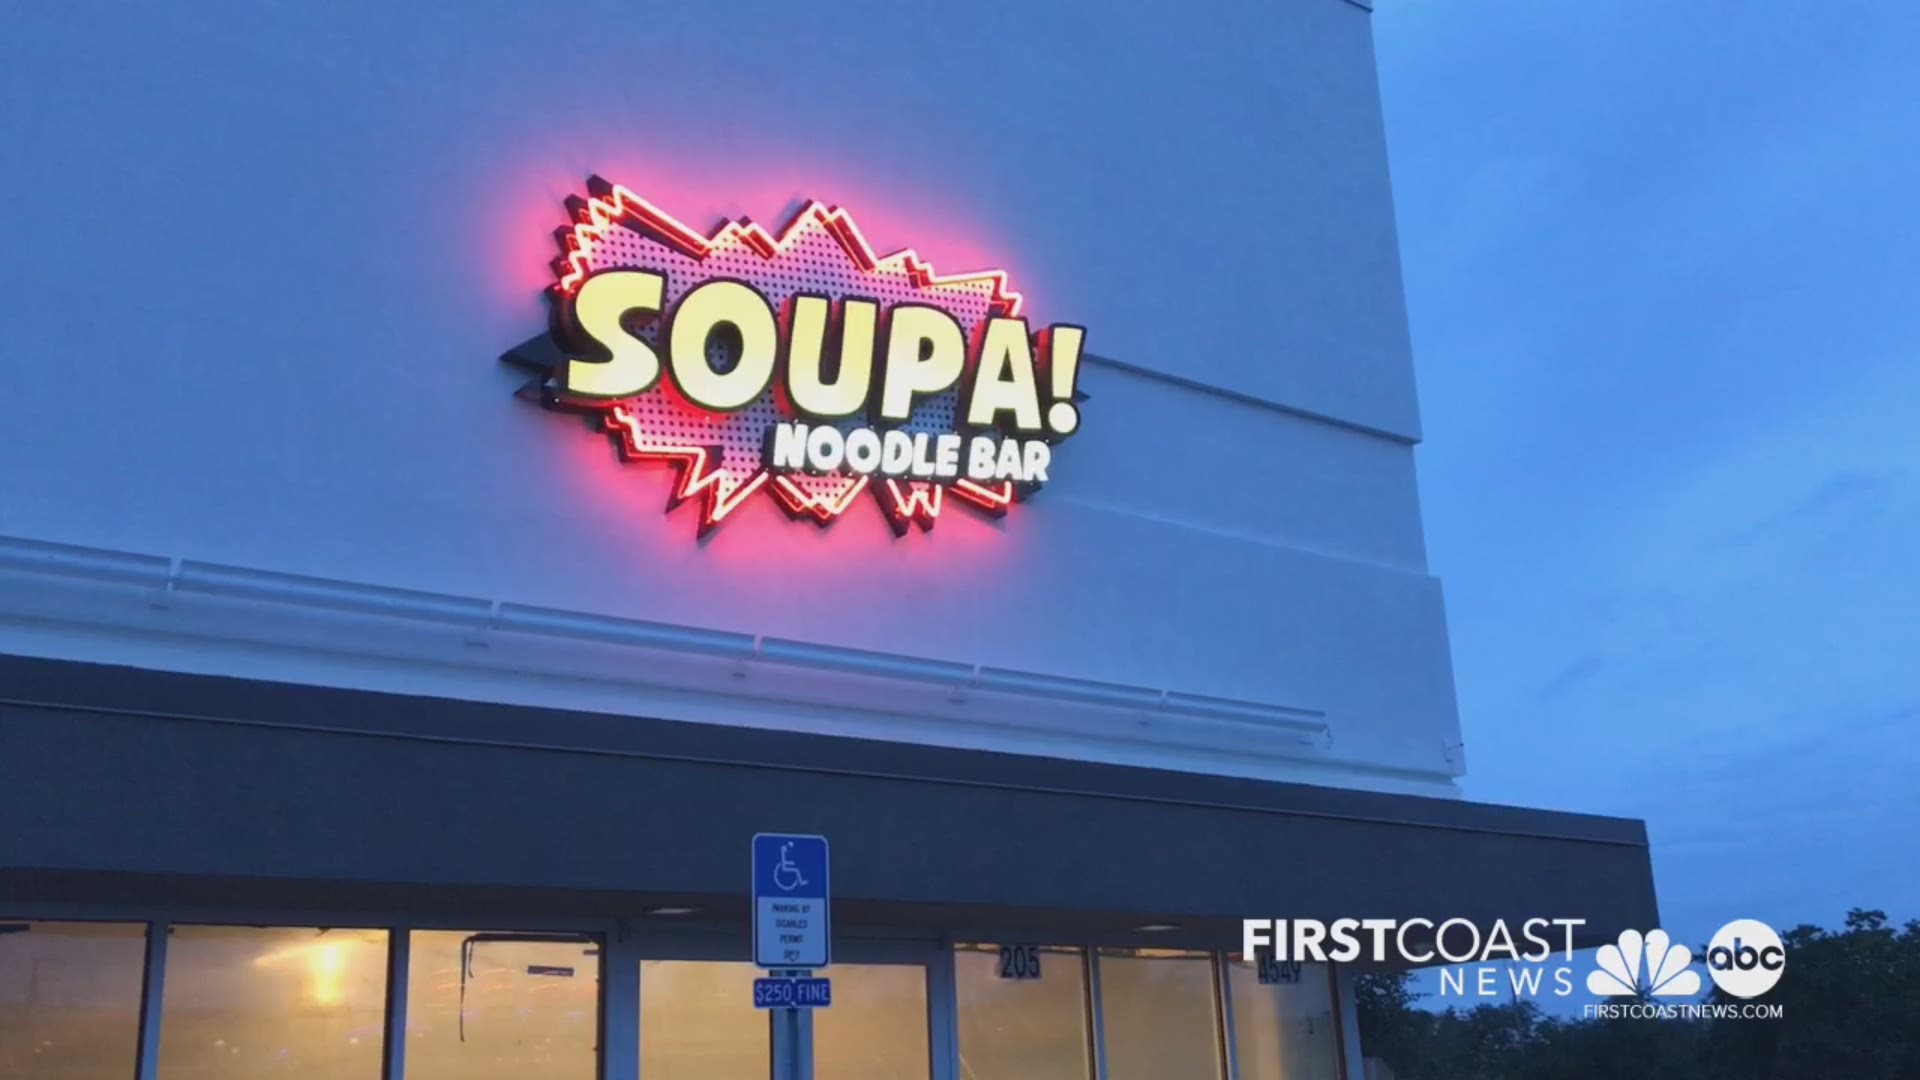 Soupa Noodle Bar is a Dragon Ball-themed restaurant heading to the Southside. The sign has just gone up but no opening date was announced.